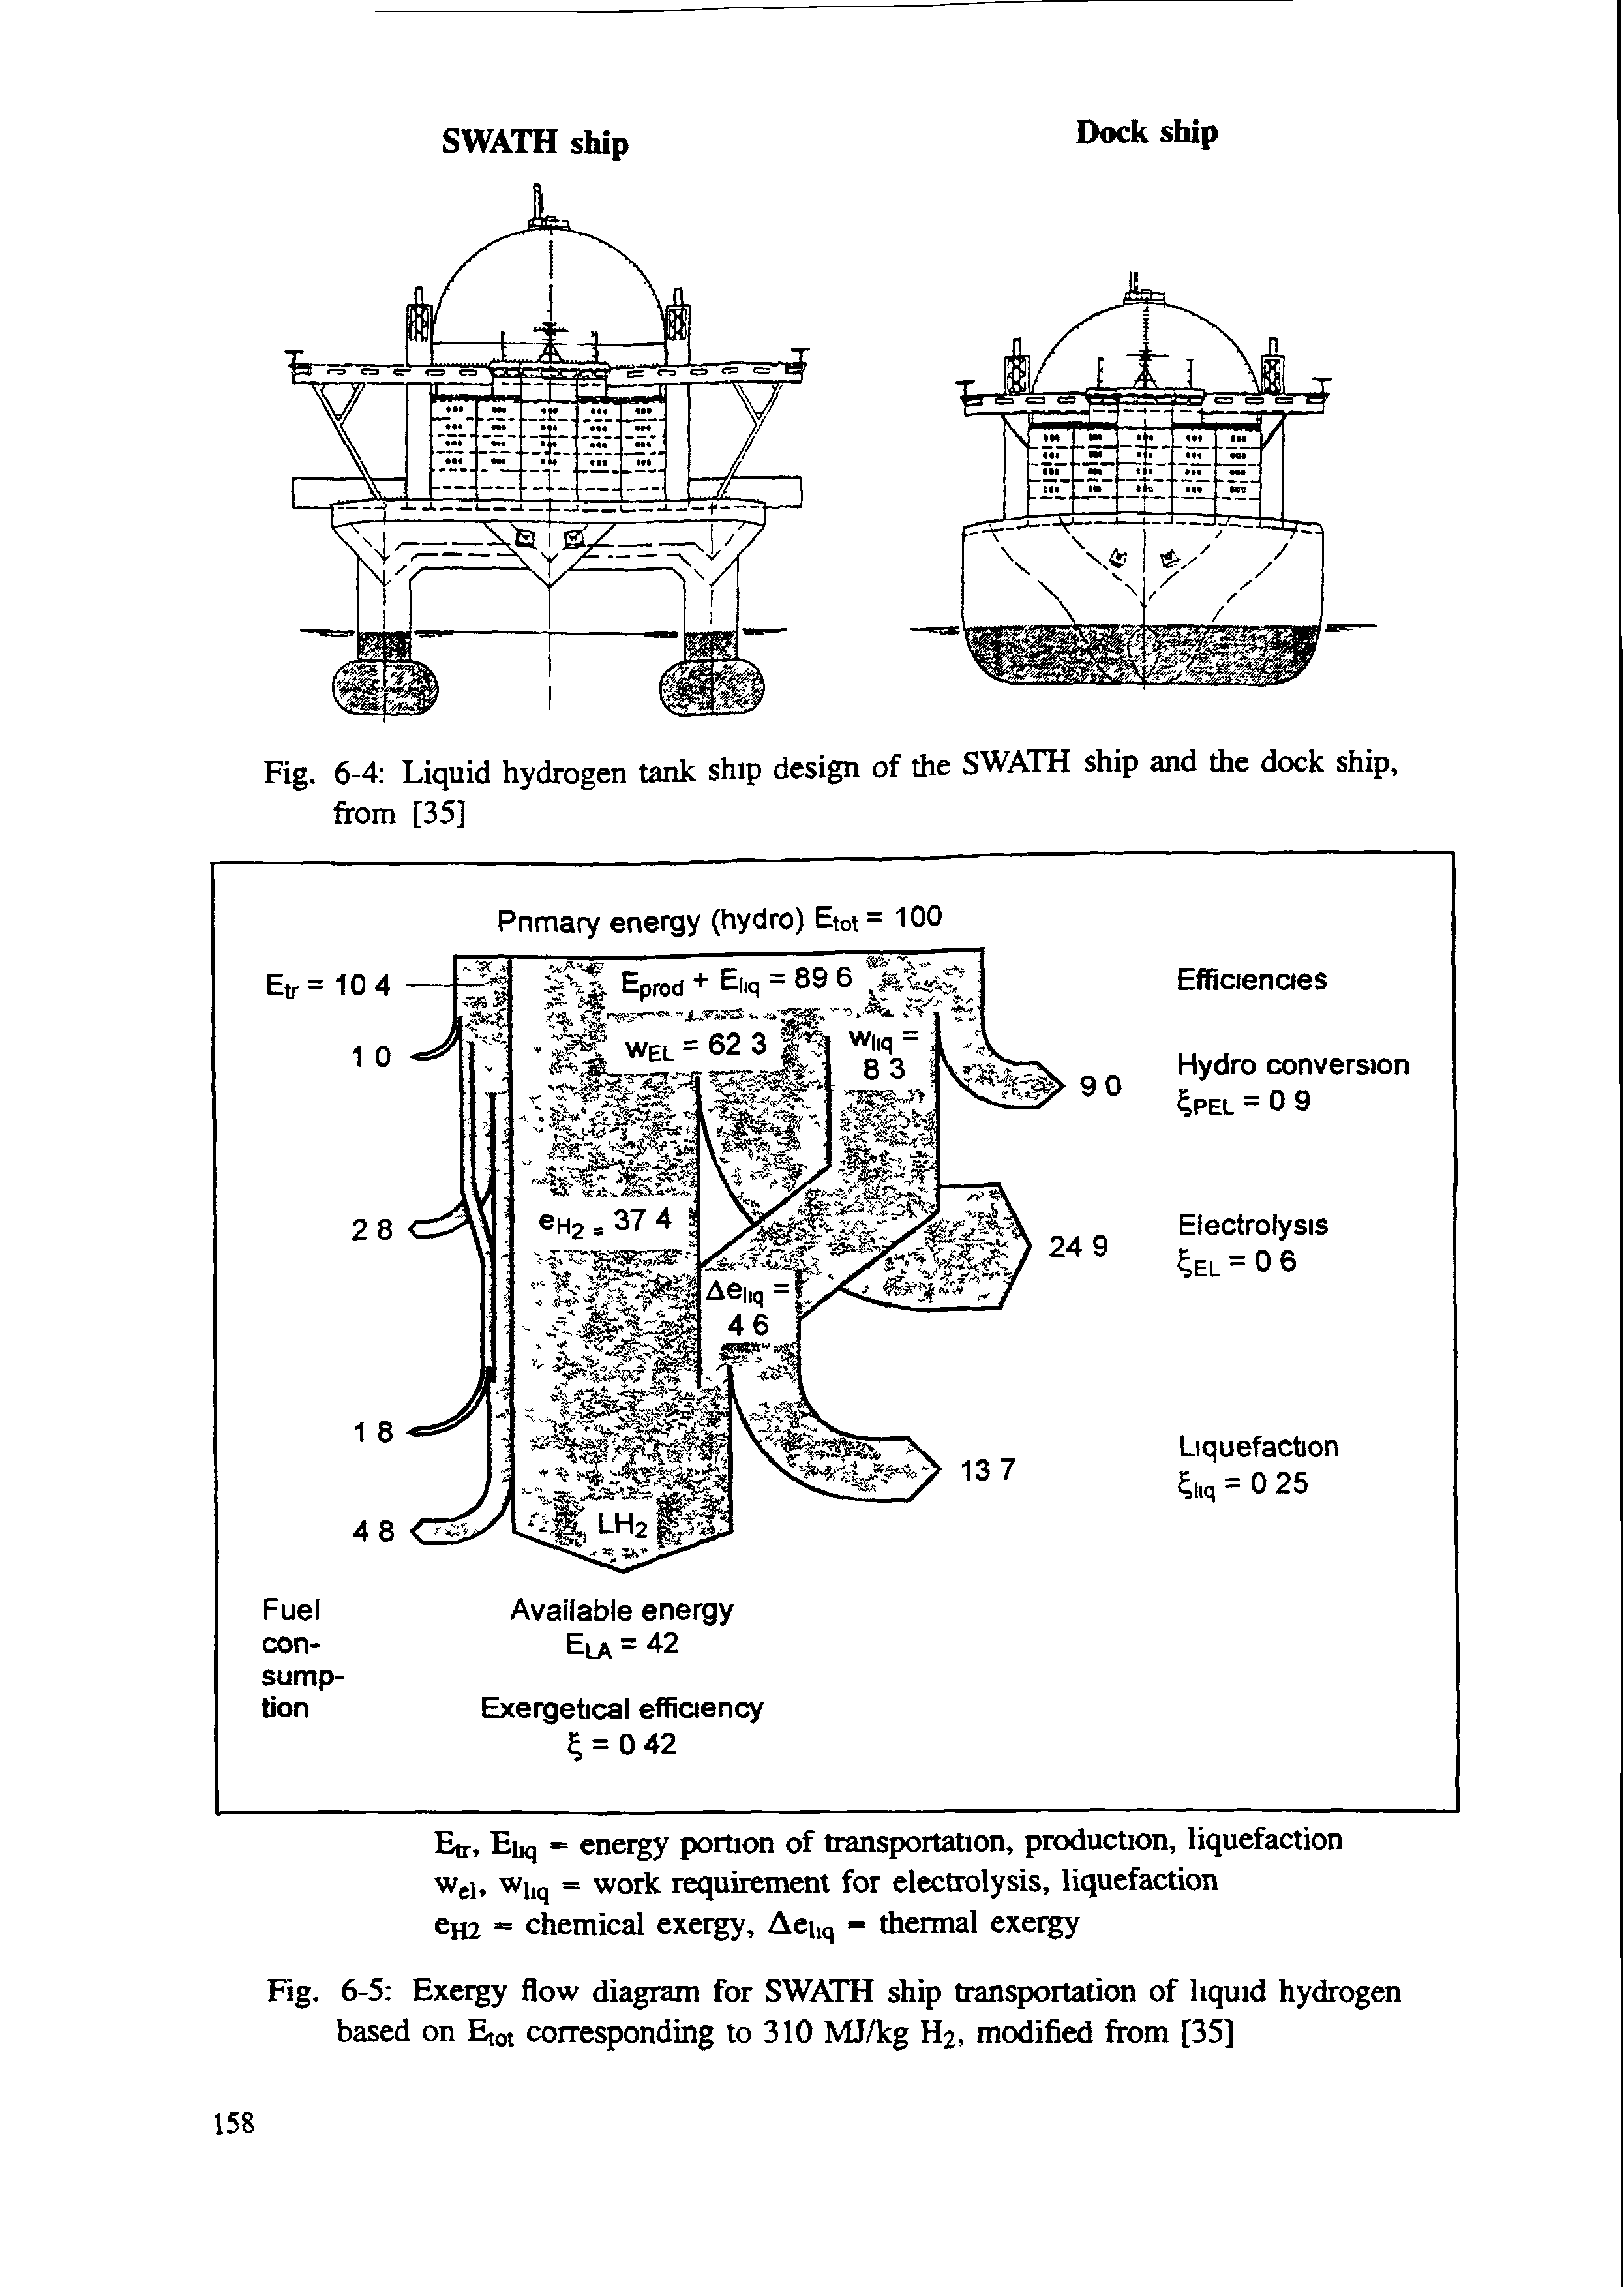 Fig. 6-5 Exergy flow diagram for SWATH ship transportation of liquid hydrogen based on Etot corresponding to 310 MJ/kg H2, modified from [35]...